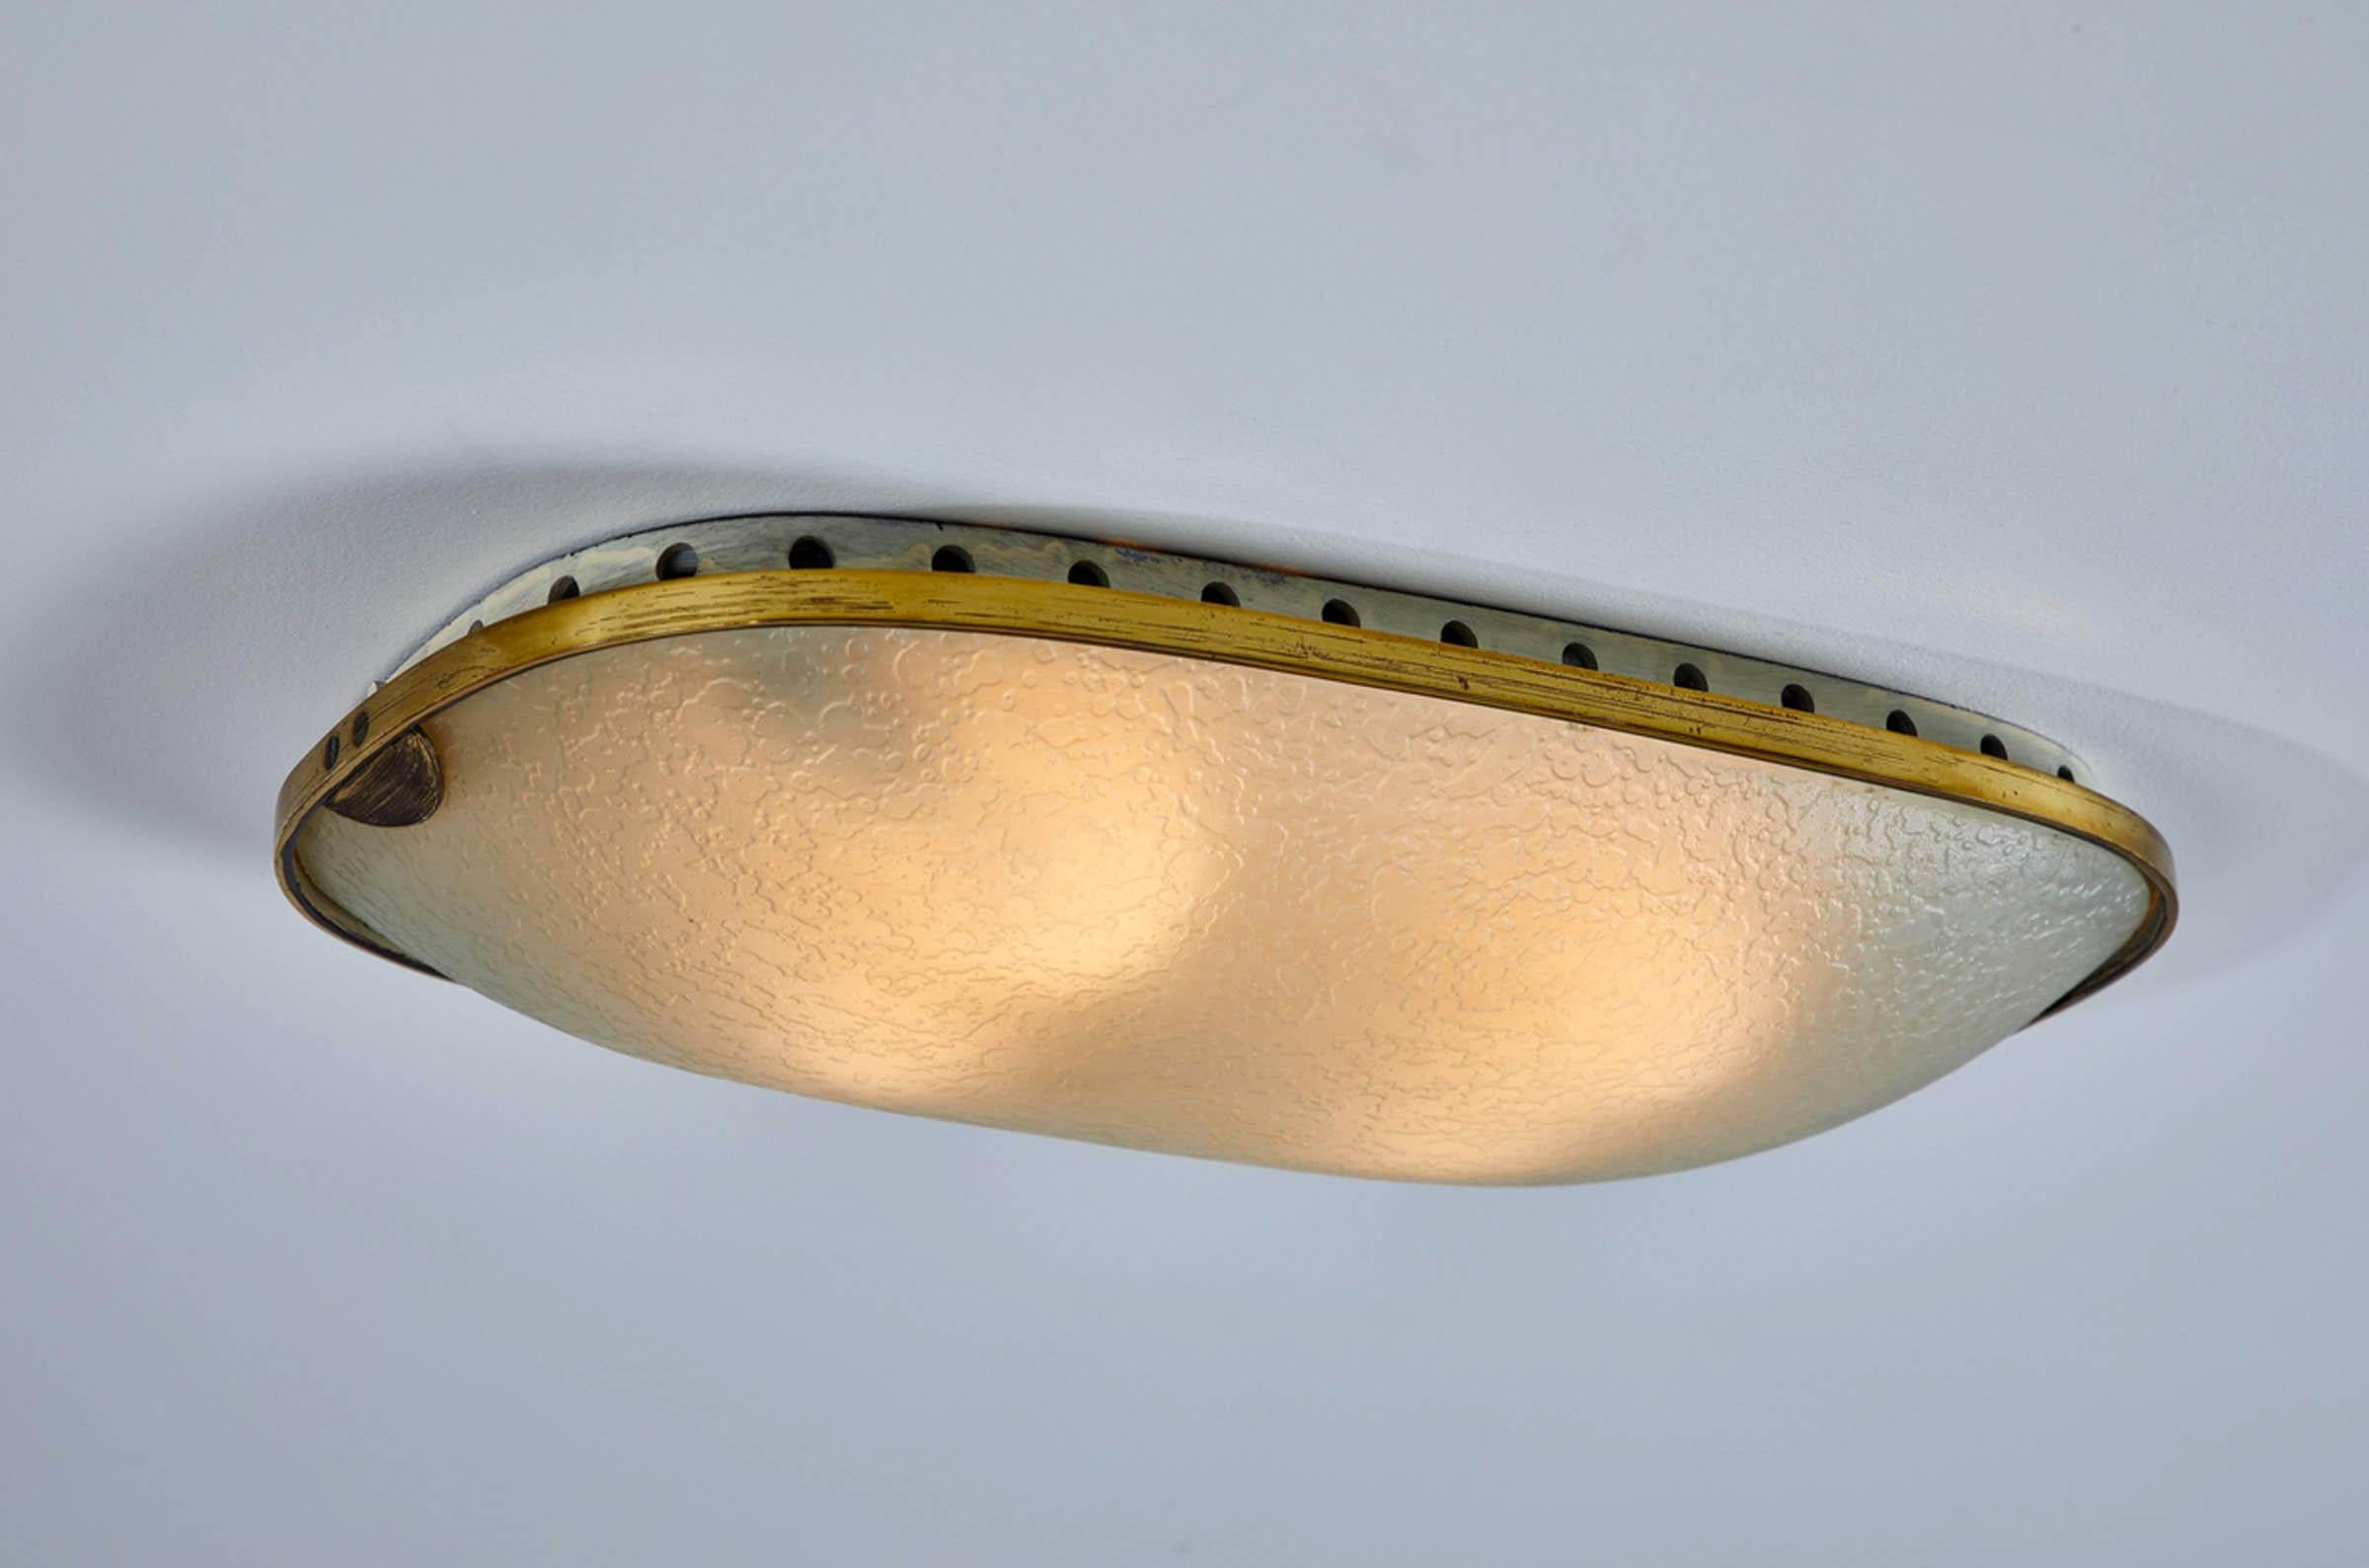 One textured glass flush mount or sconce with brass hardware by Fontana Arte. 
Manufactured in Italy, circa 1950s. 
Can be mounted either as sconces or flush mounts. 
The light takes four E27 40w maximum bulbs.